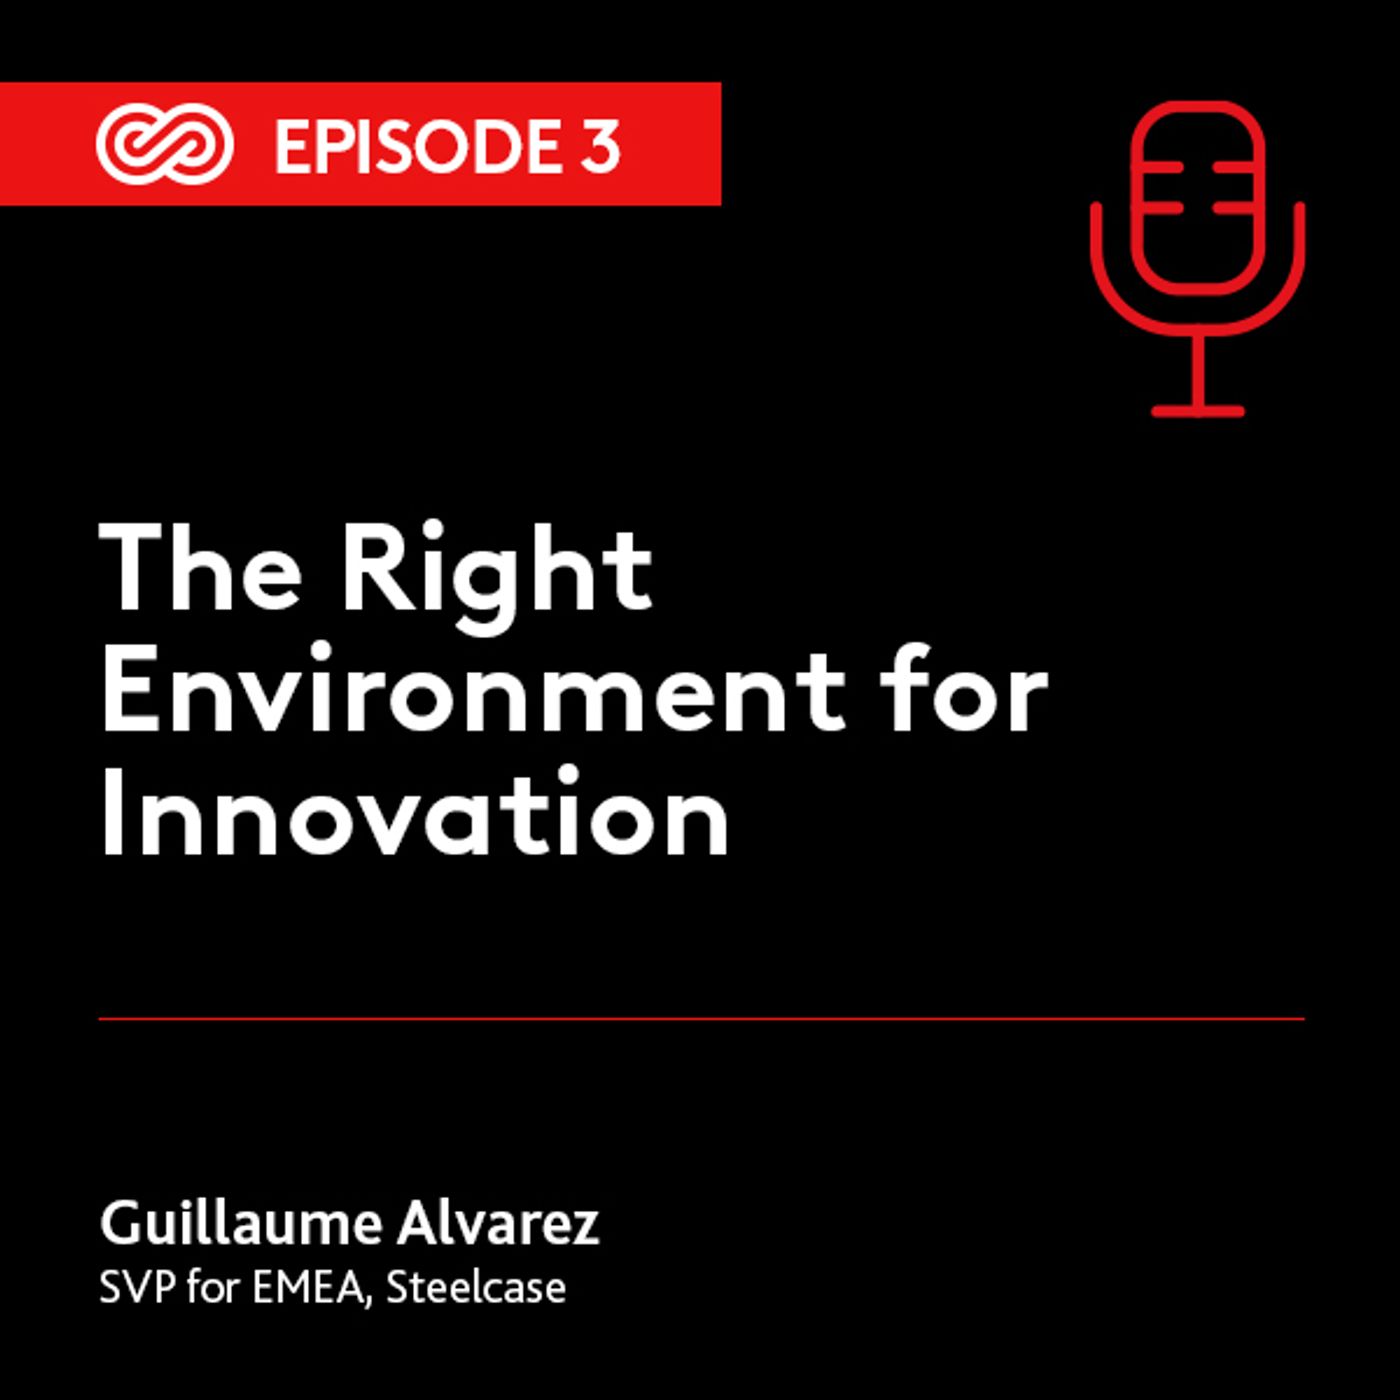 3 - The Right Environment for Innovation